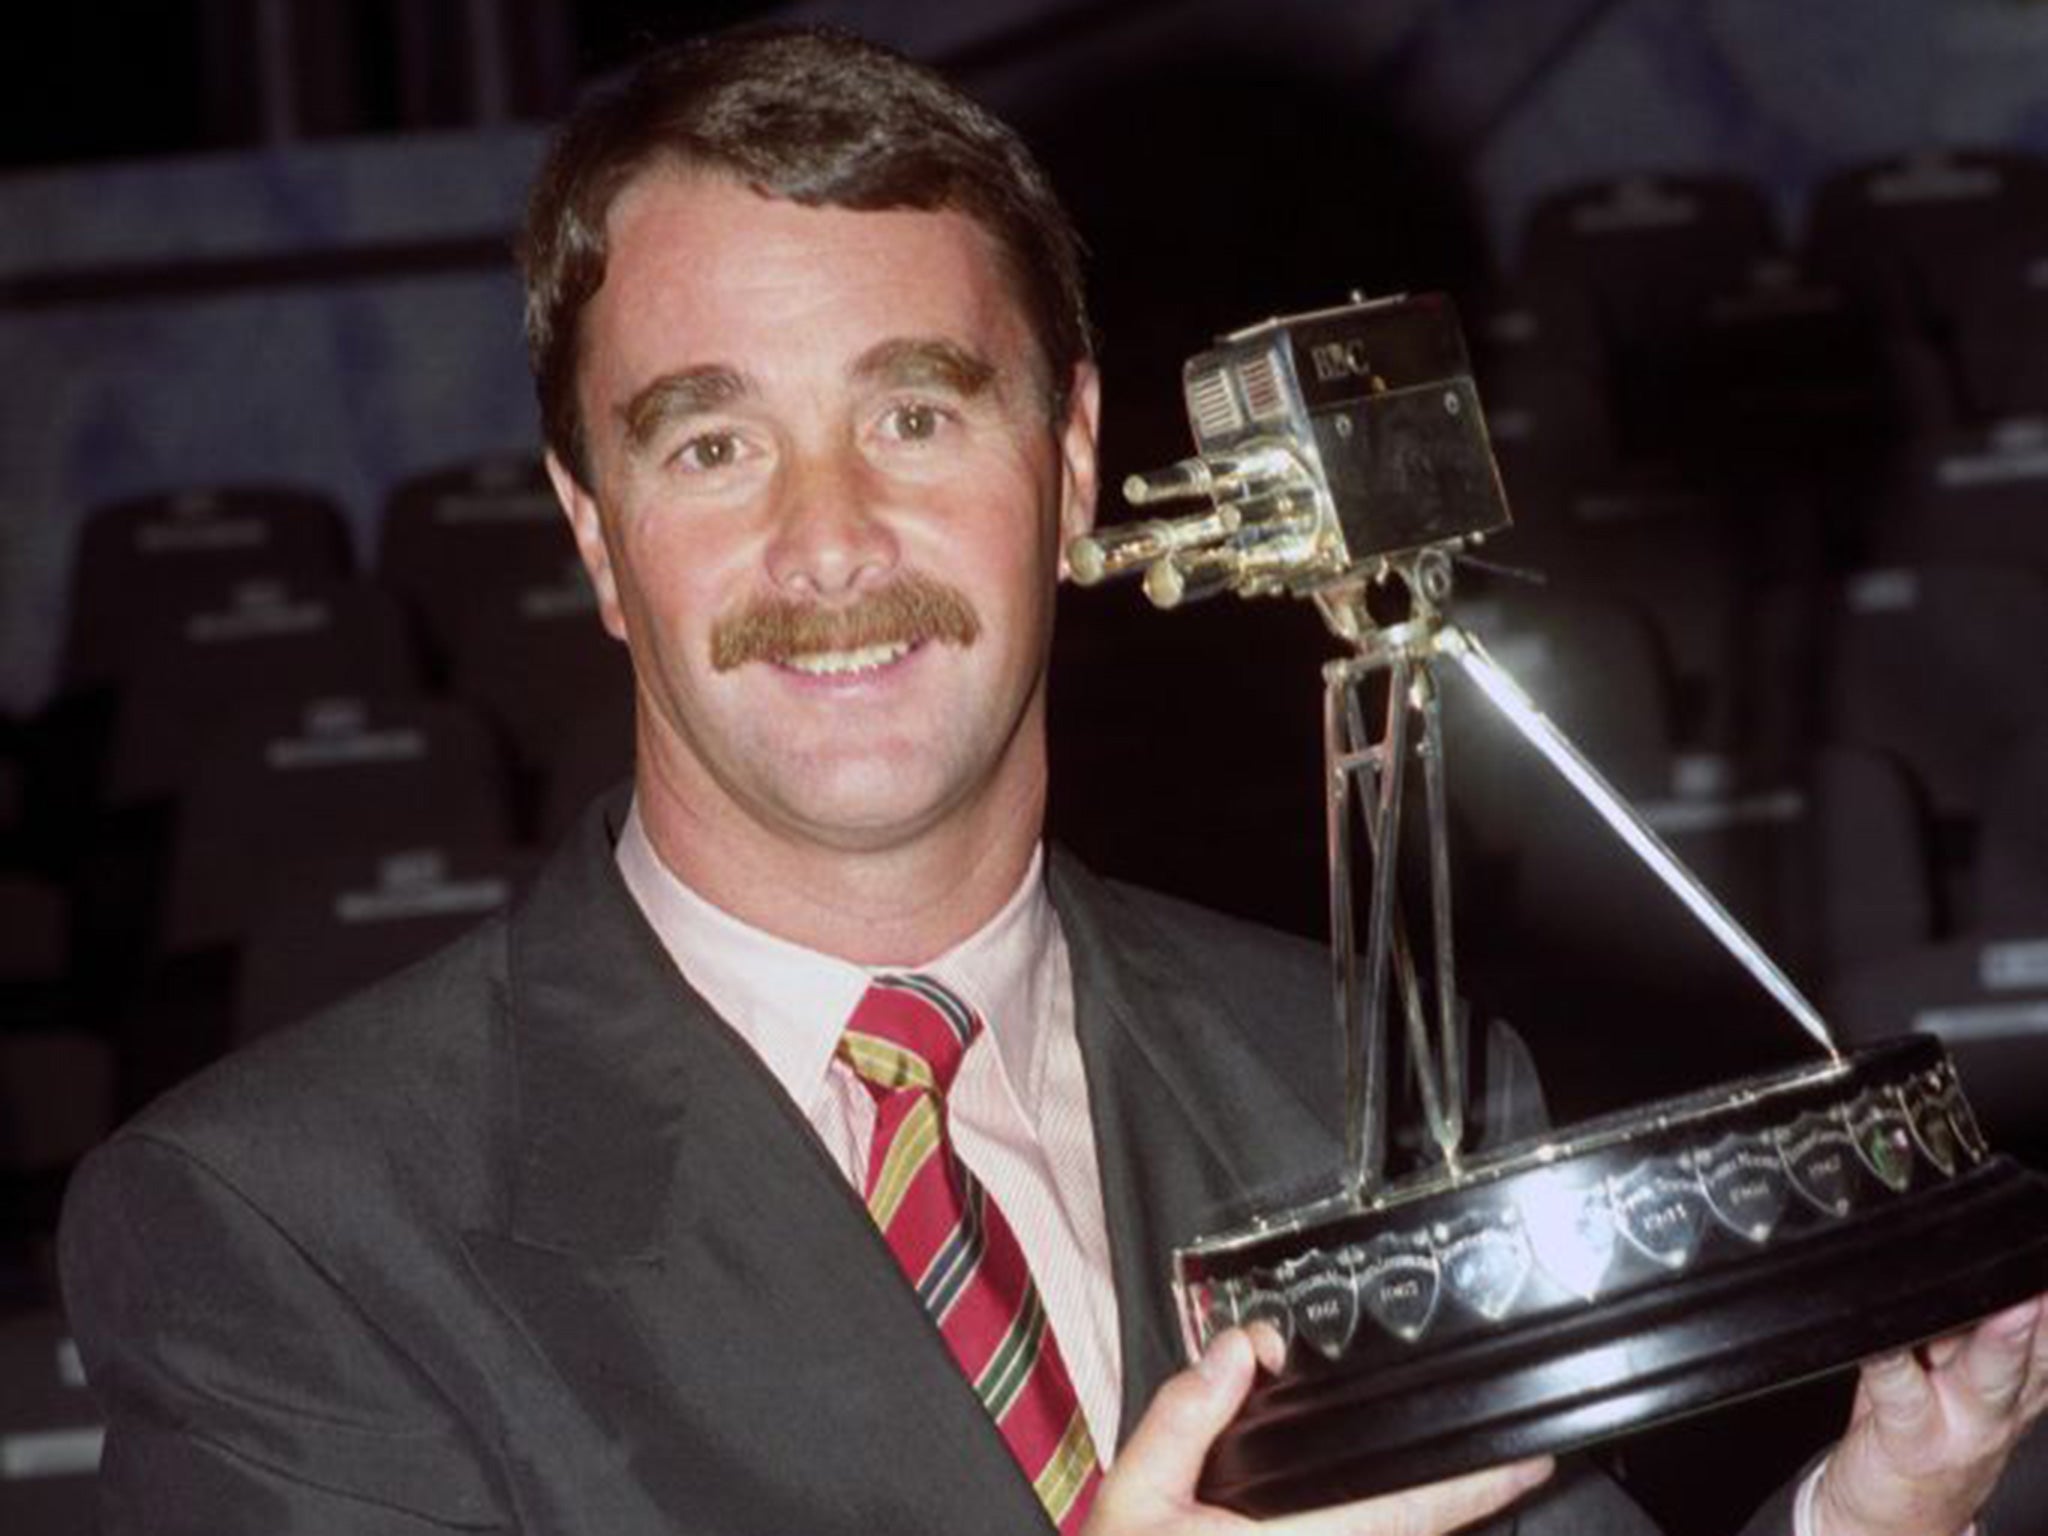 Nigel Mansell is one of only three people to have won SPOTY twice